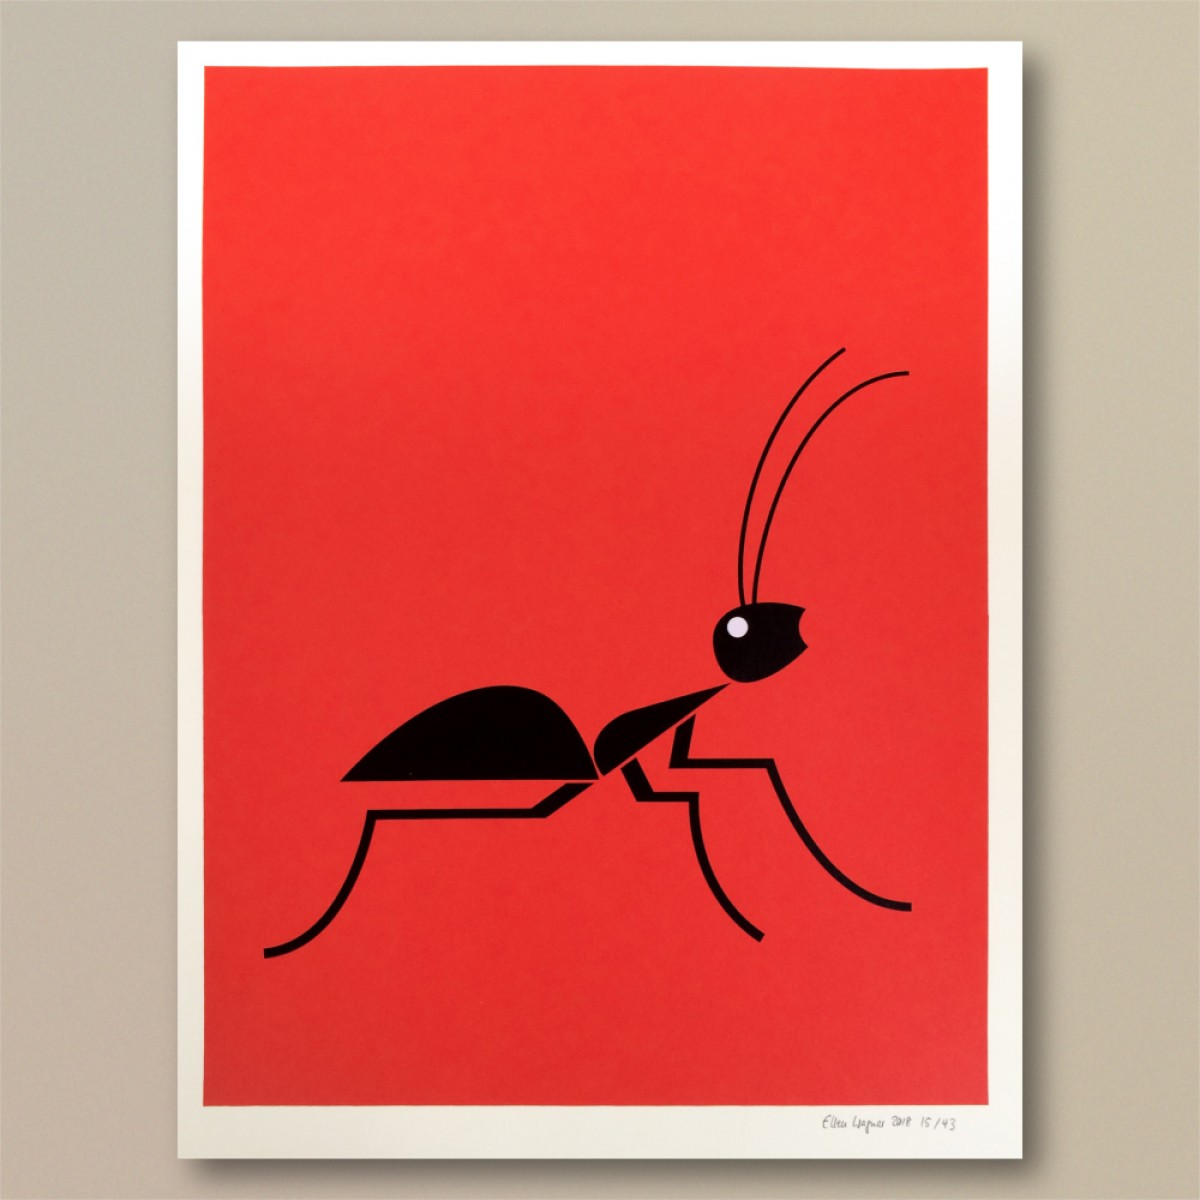 Print now - Riot later
Abstract Ant